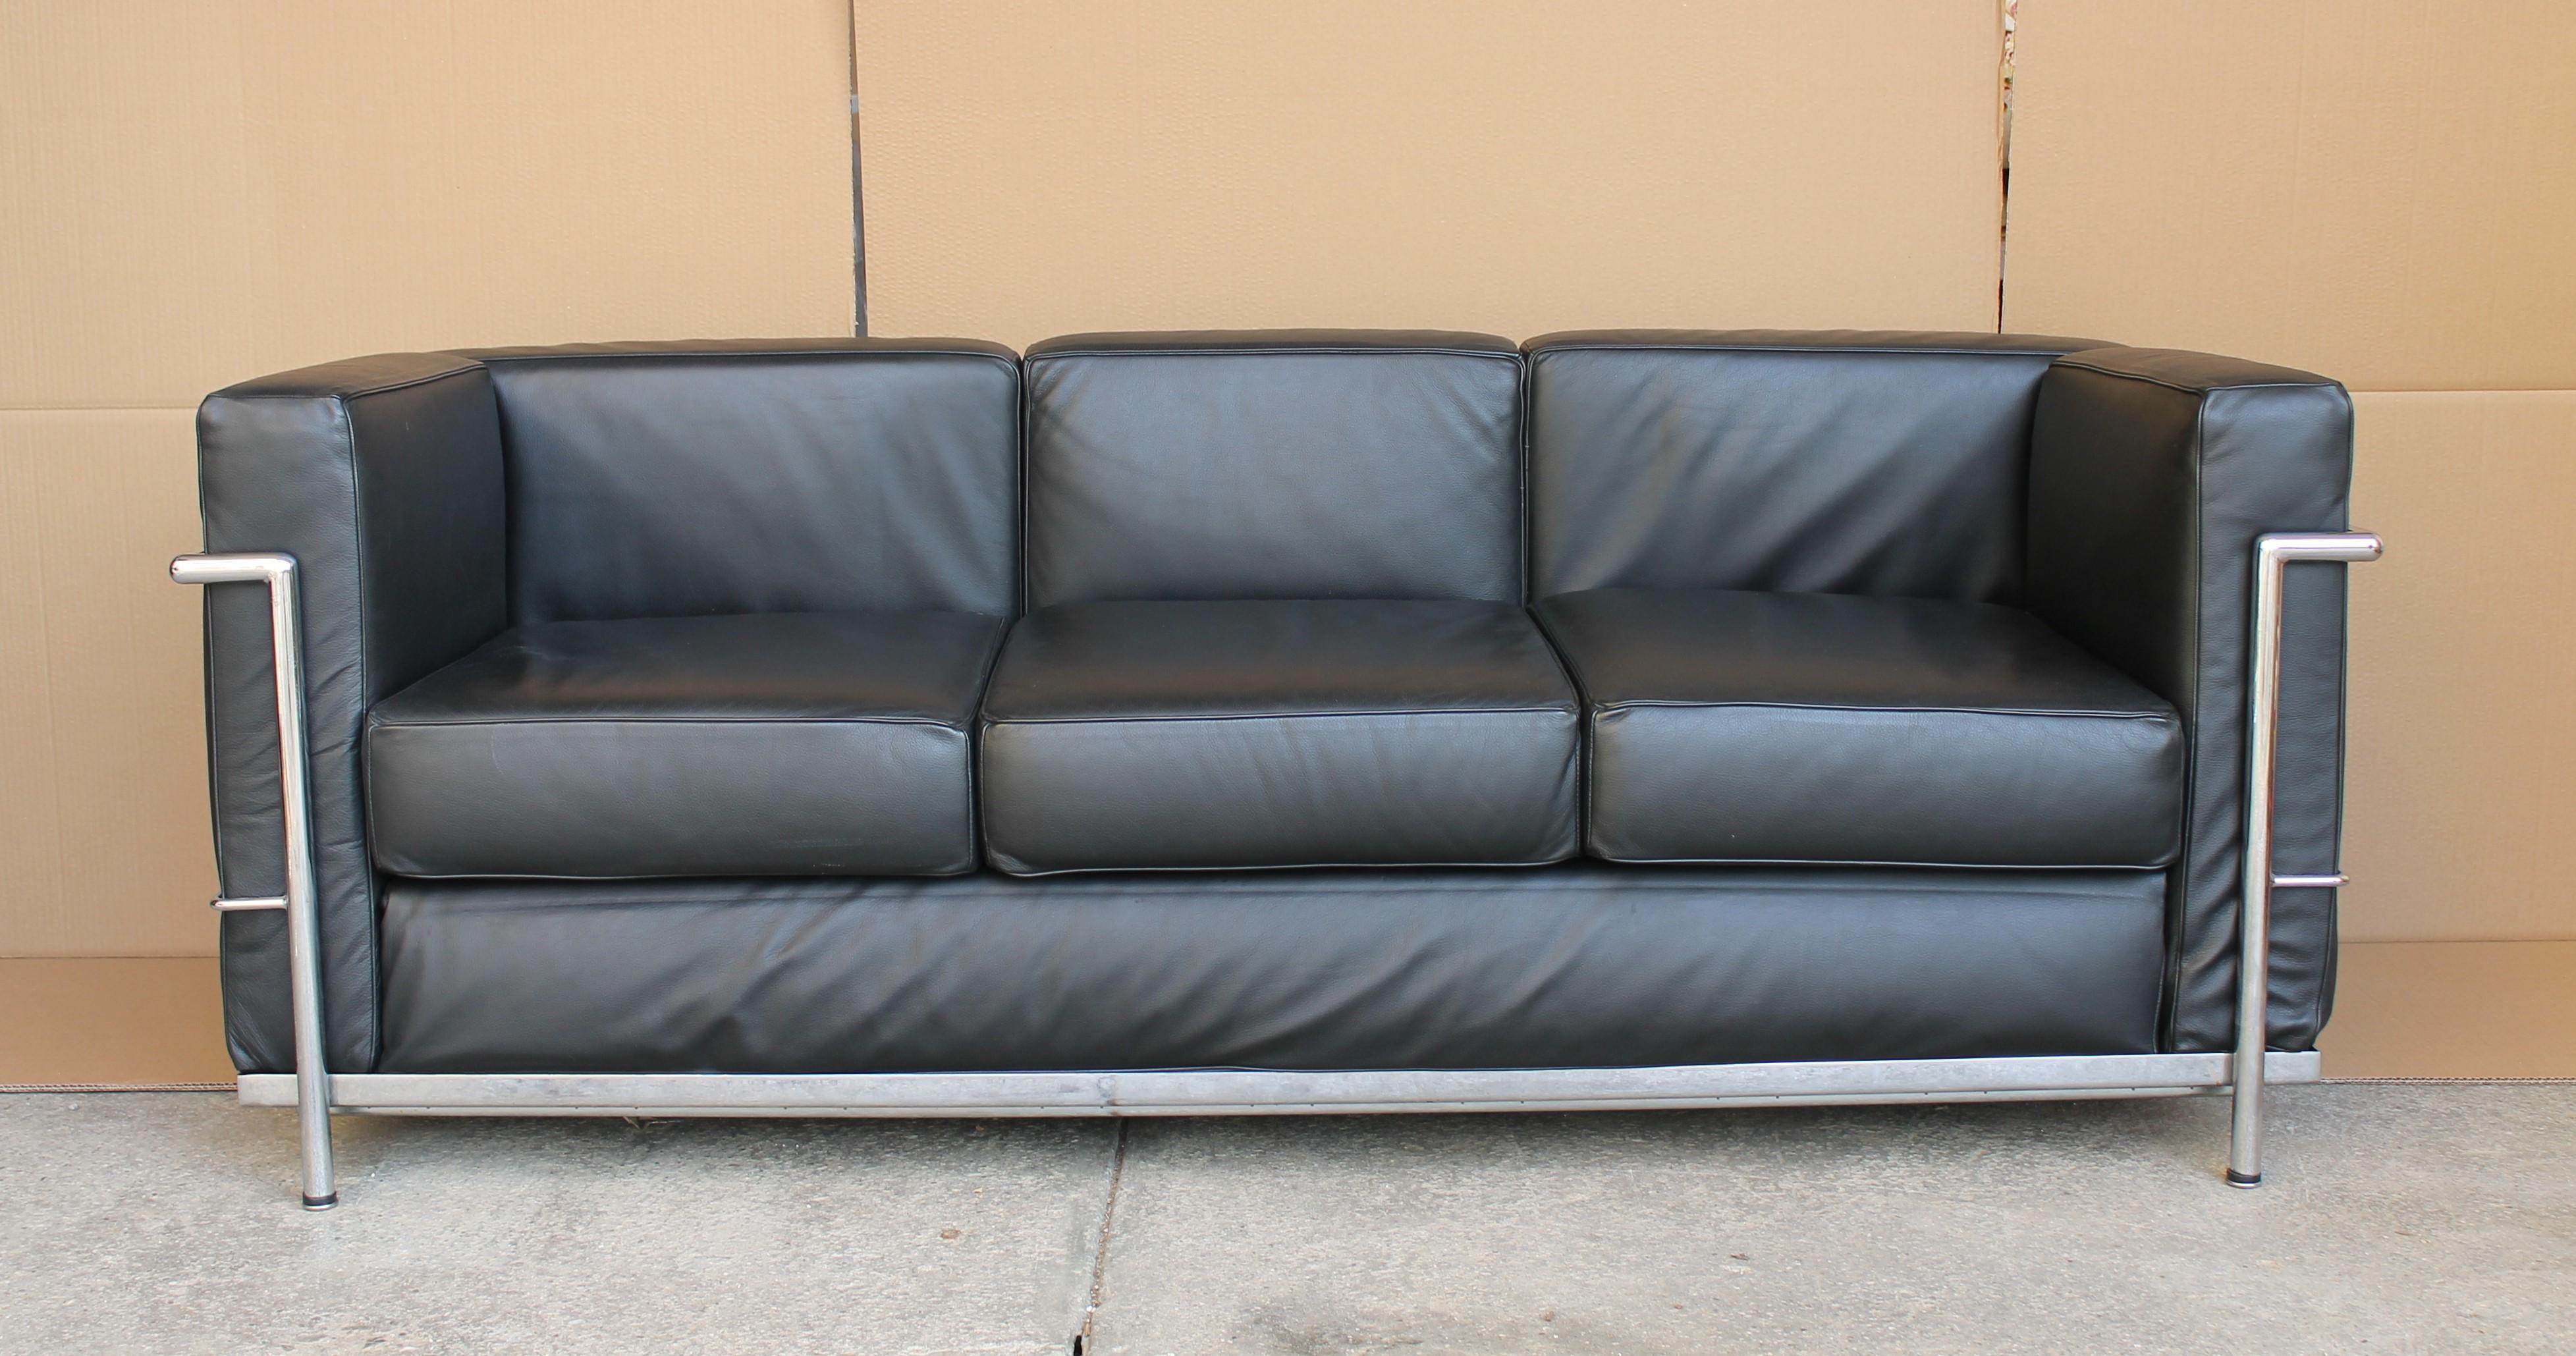 Le Corbusier LC2 black leather three-seat sofa for Alivar.

The sofa is in very good conditions.

Licensed edition Le Corbusier sofa by Alivar. Alivar was the first licensed manufacturer of Le Corbusier designs furniture not Cassina.